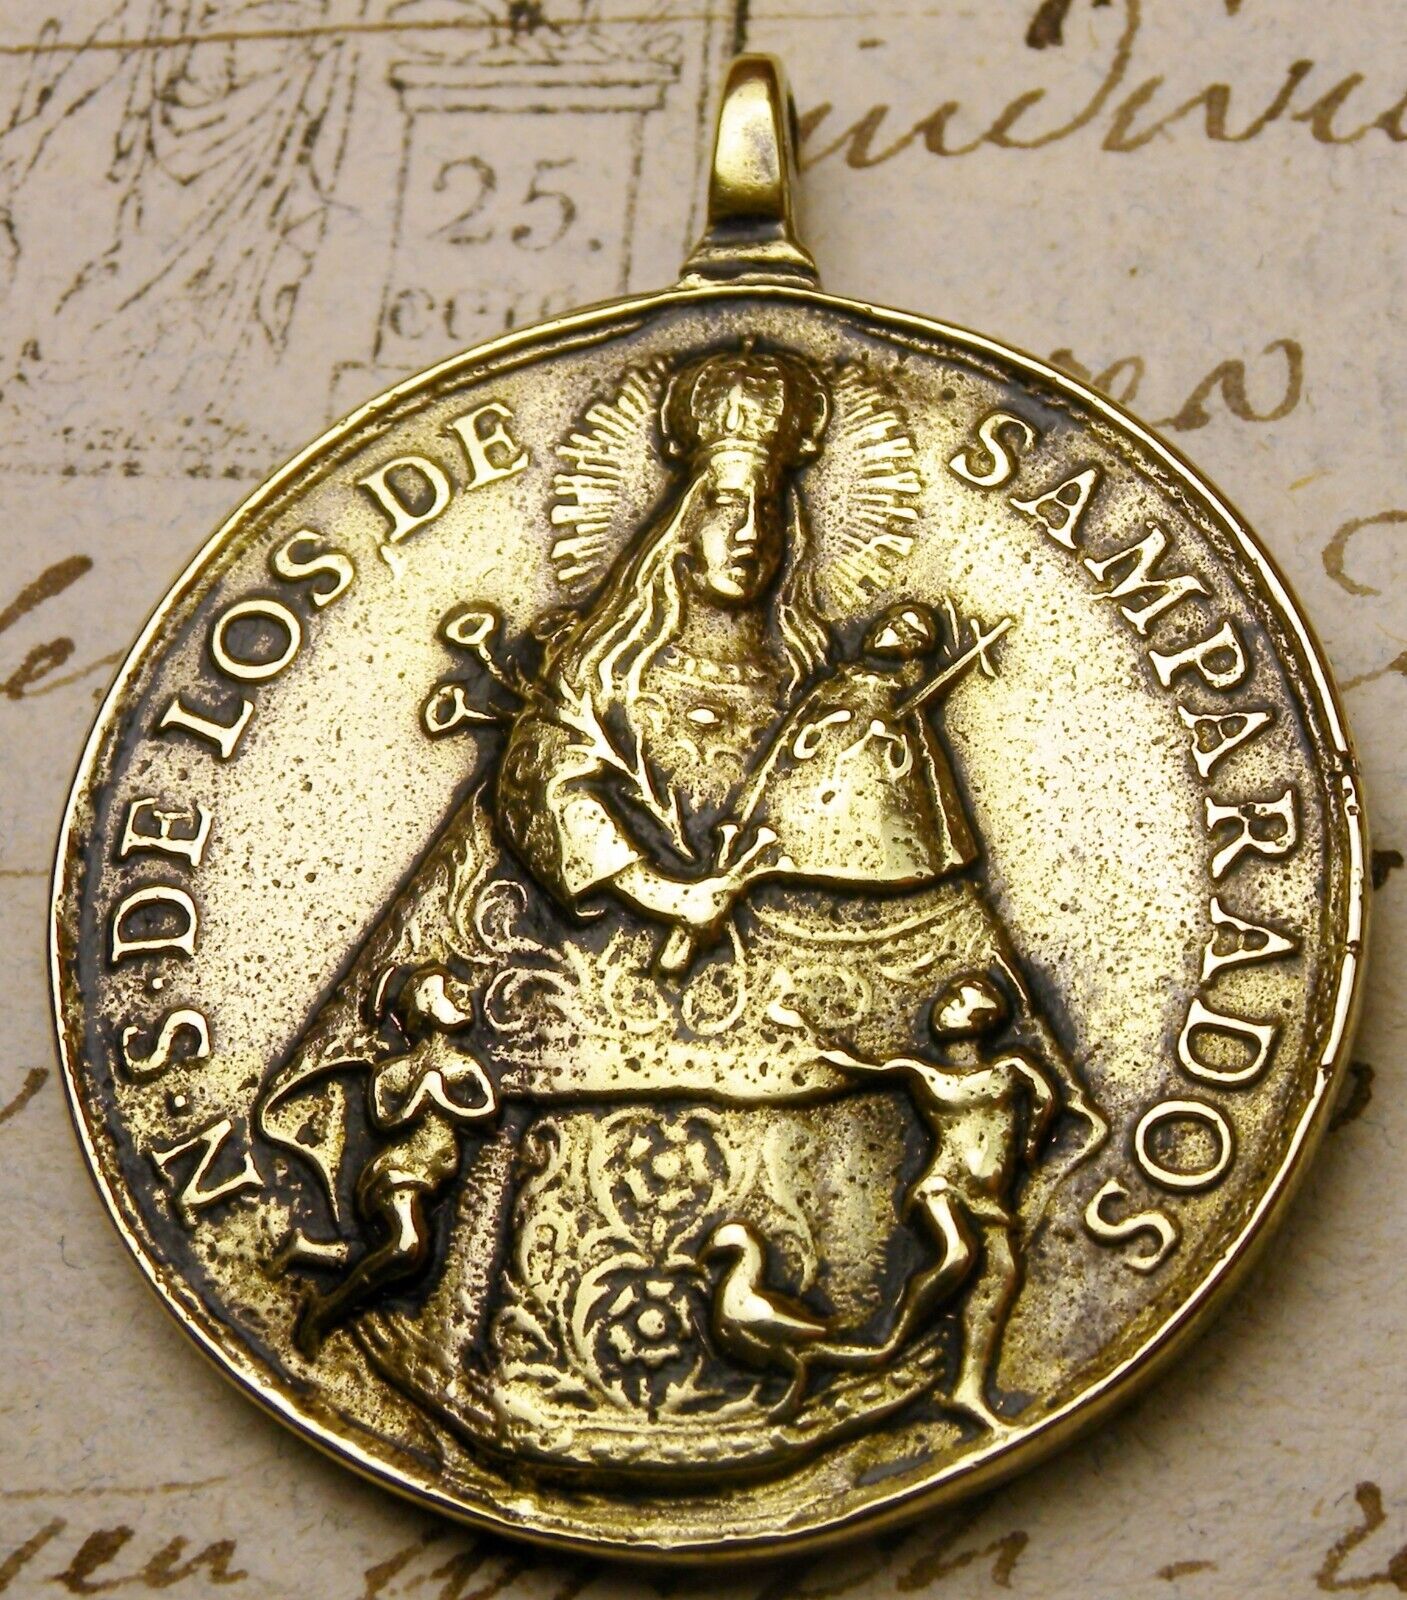 ANTIQUE 18TH CENTURY OUR LADY OF THE FORSAKEN ST. LUCIA OF SYRACUSE MEDAL